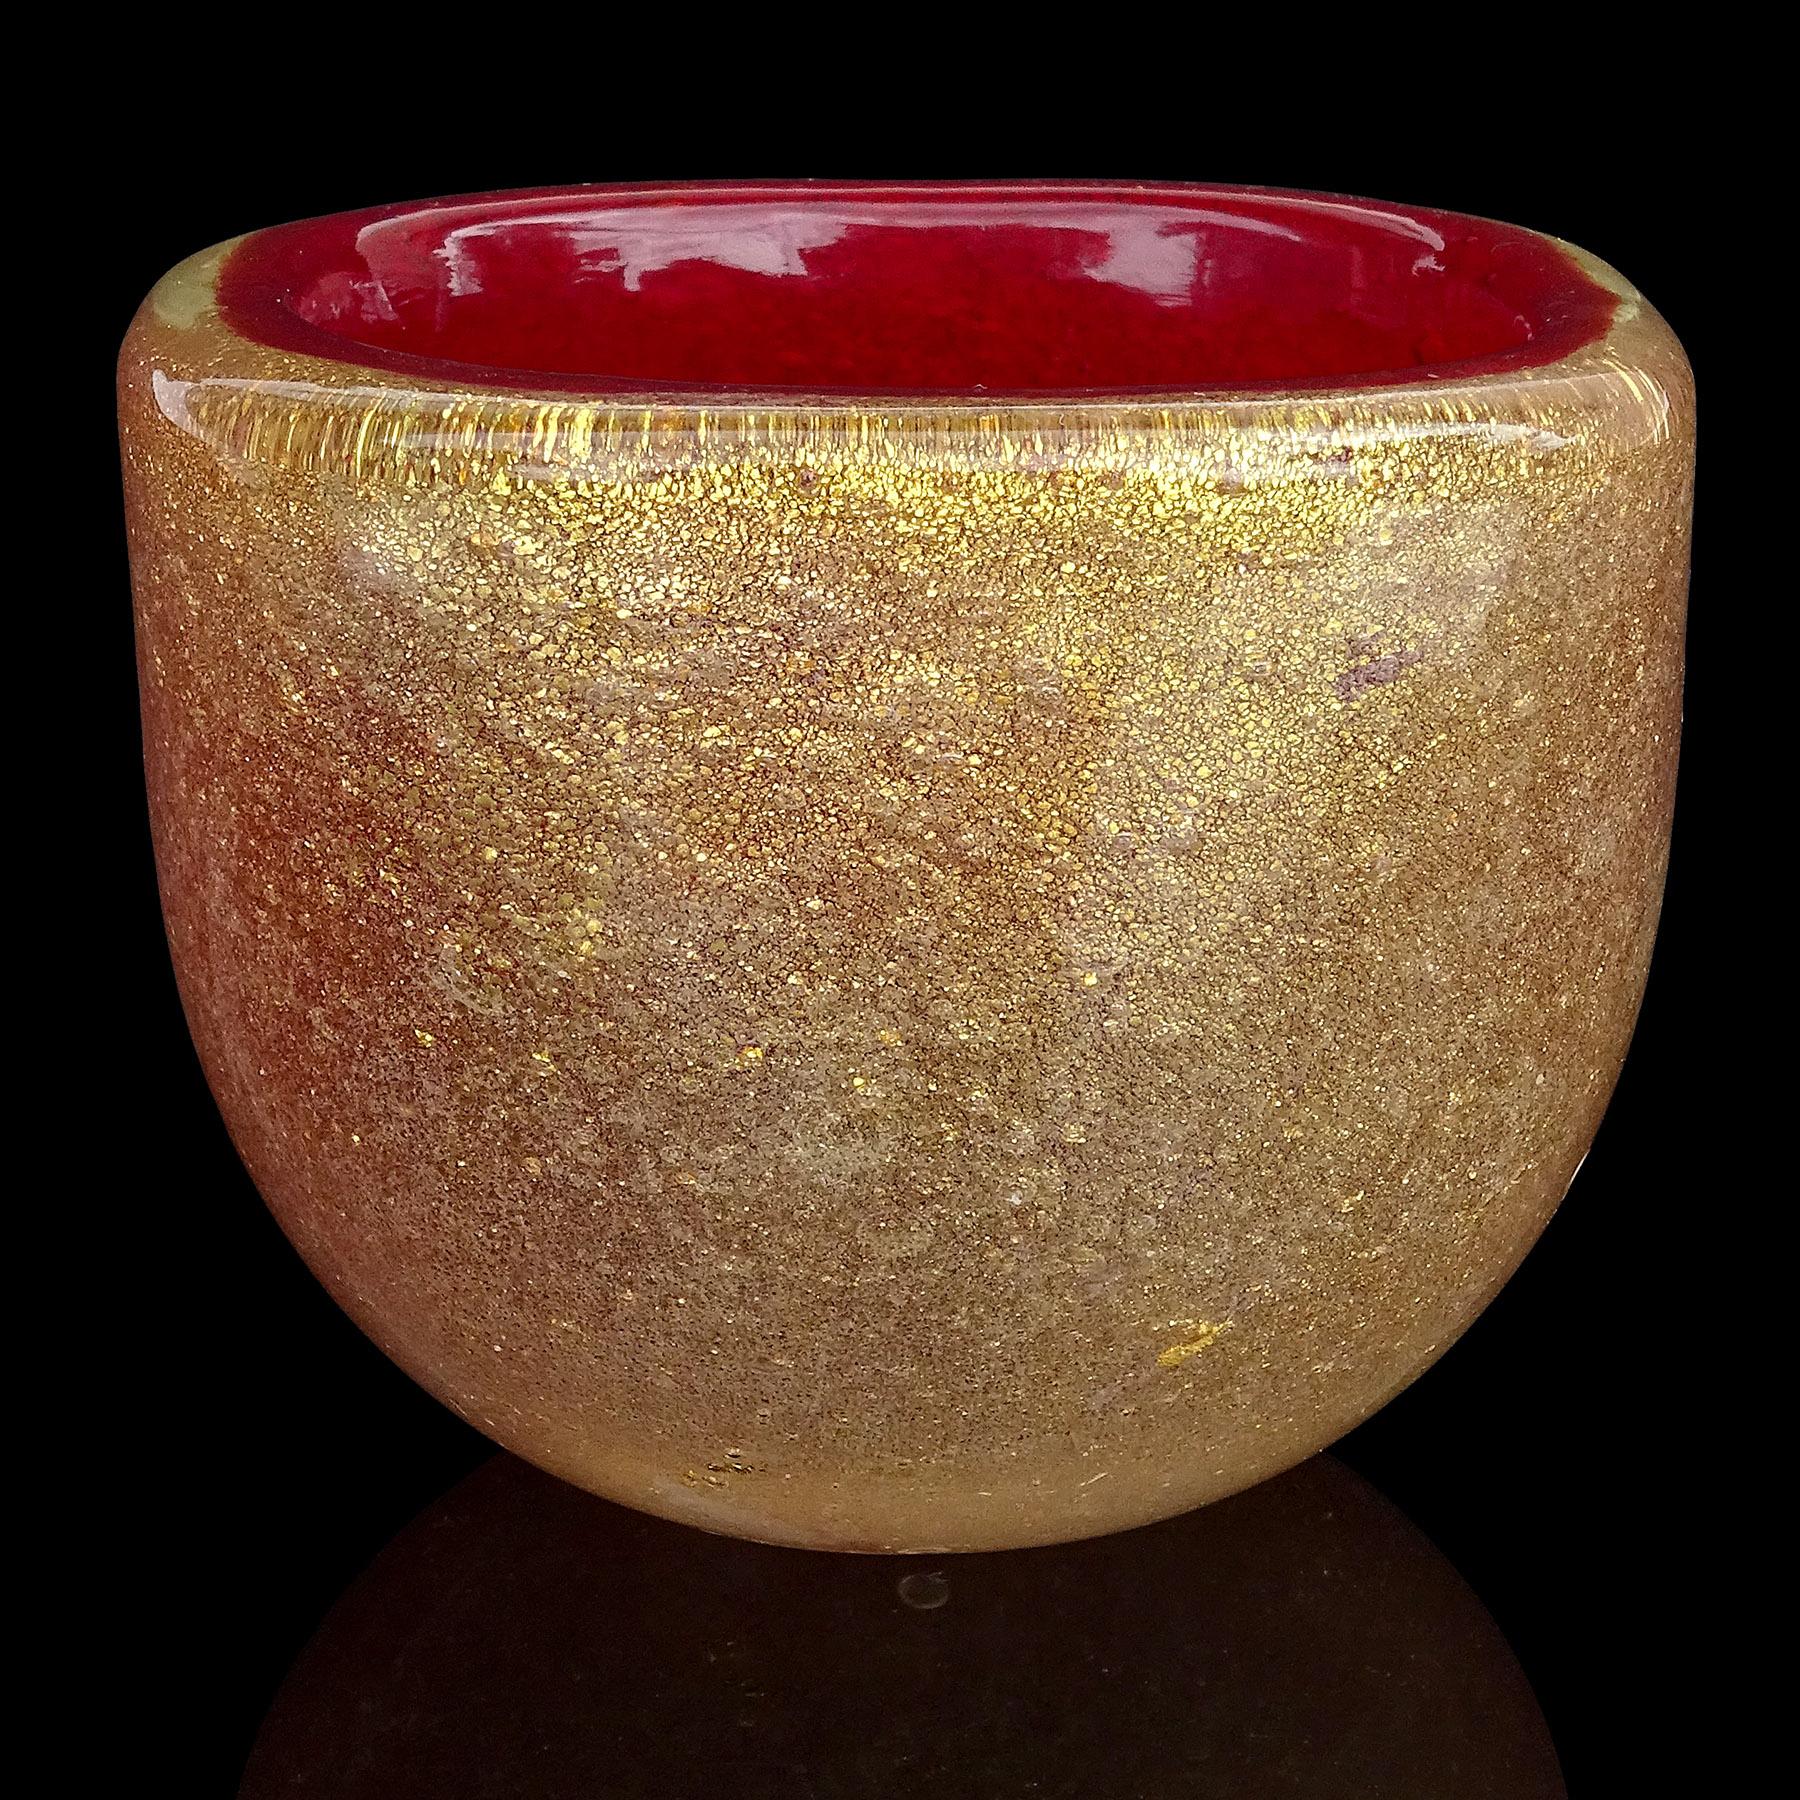 Beautiful vintage Murano hand blown Sommerso ruby red, bubbles and gold flecks Italian art glass decorative personal ashtray / bowl. Documented to designer to Flavio Poli for Seguso Vetri d' Arte. The piece is published in the company's book, model